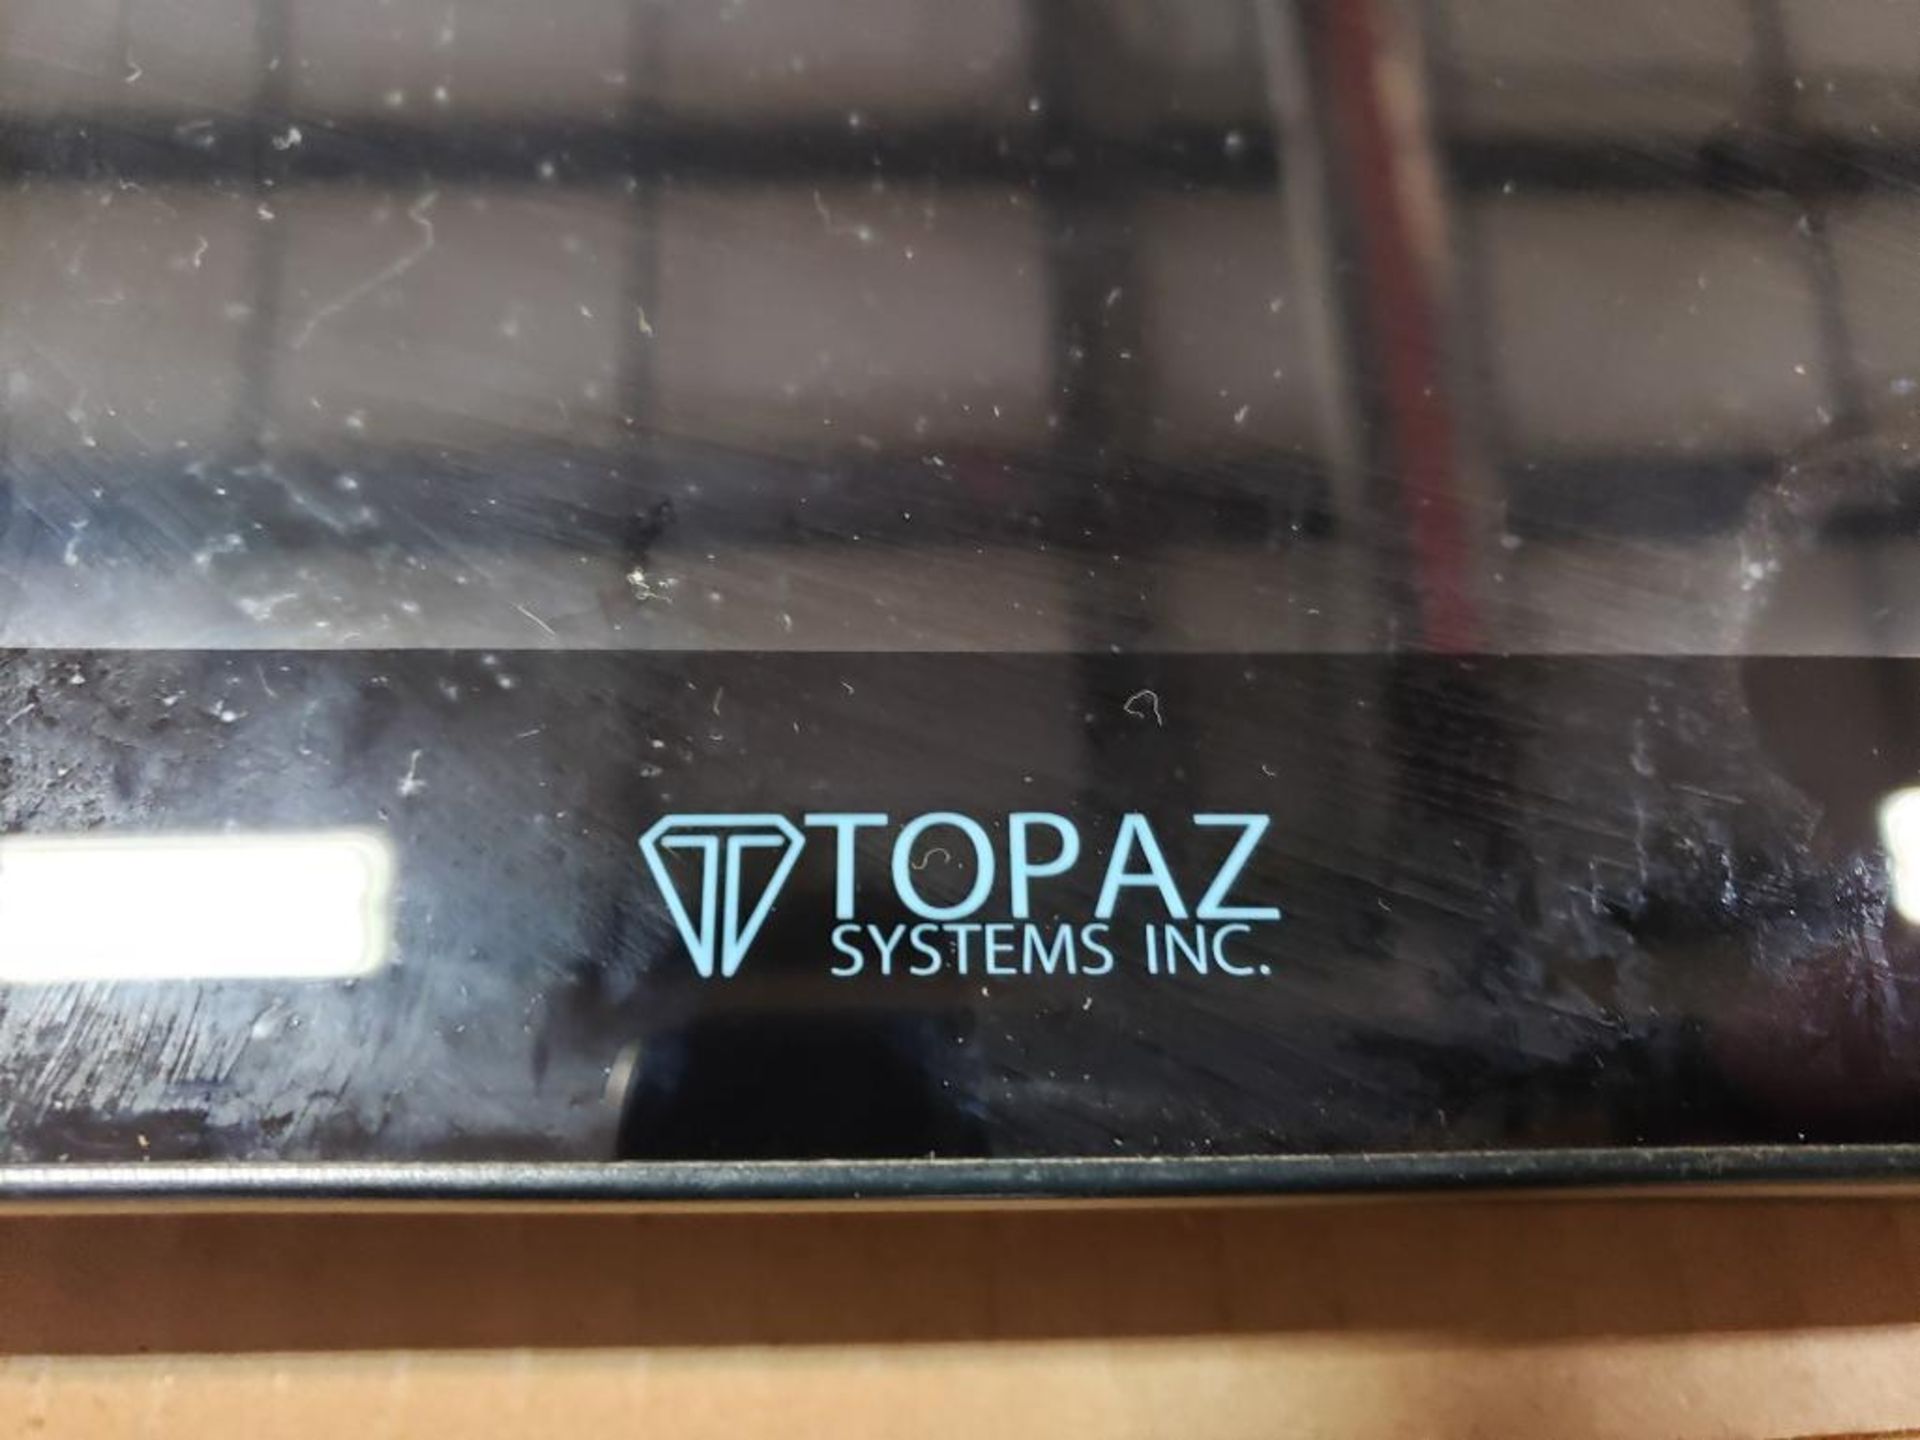 Qty 4 - Topaz Systems INC. GemView 10 Tablet Display. TD-LBK101VA-USB-R. Without pen. - Image 2 of 4